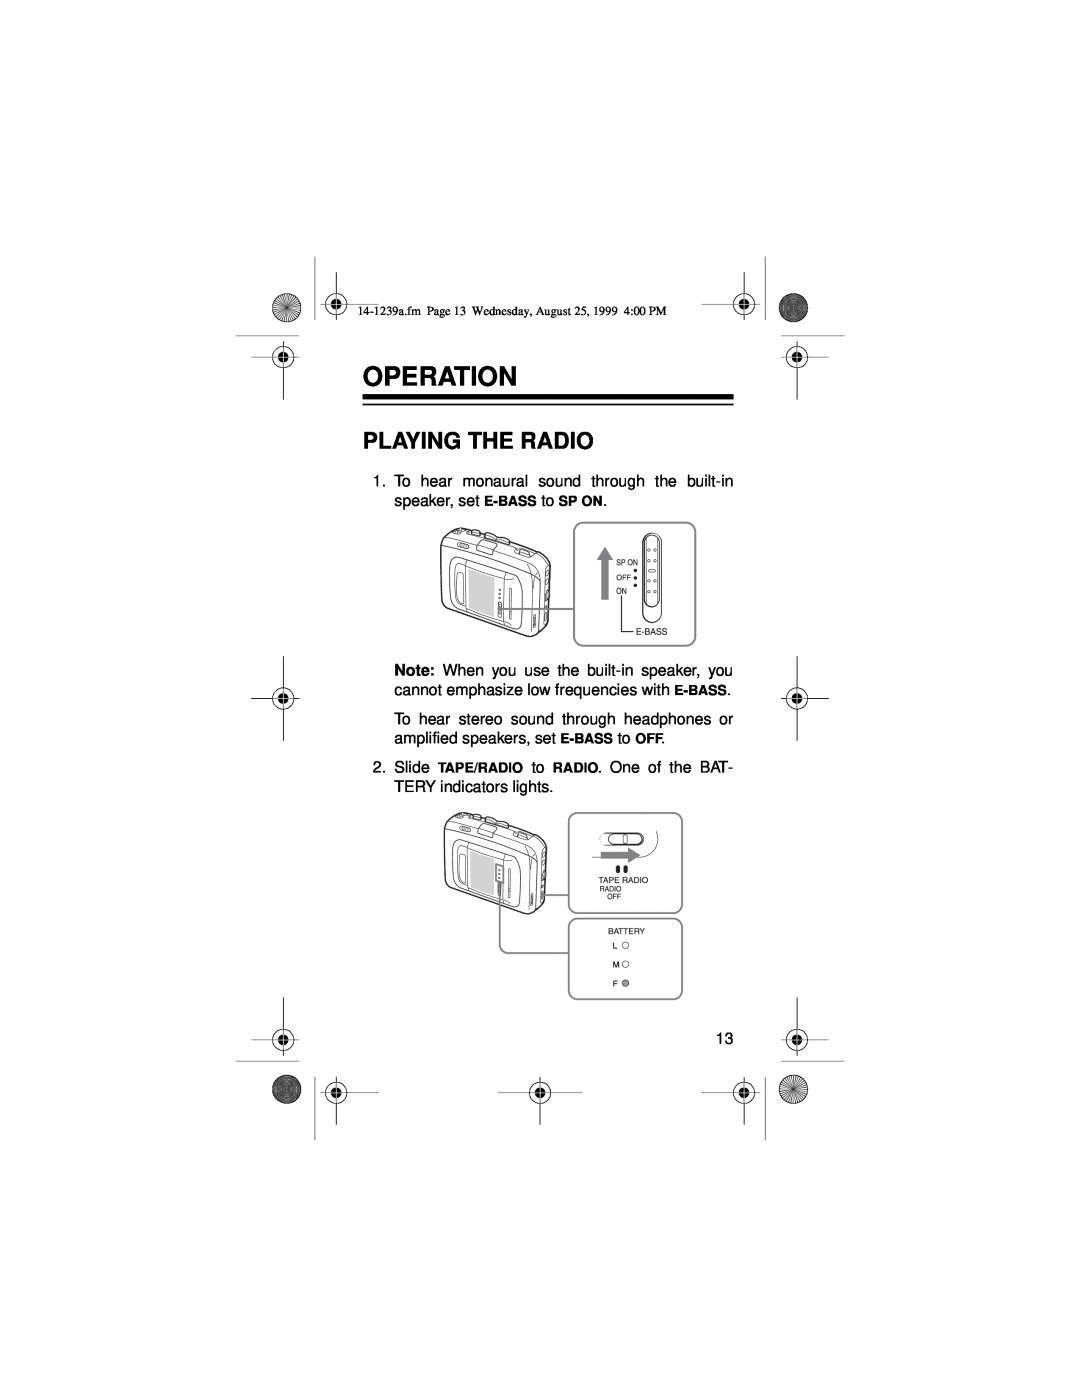 Optimus SCR-96 owner manual Operation, Playing The Radio 